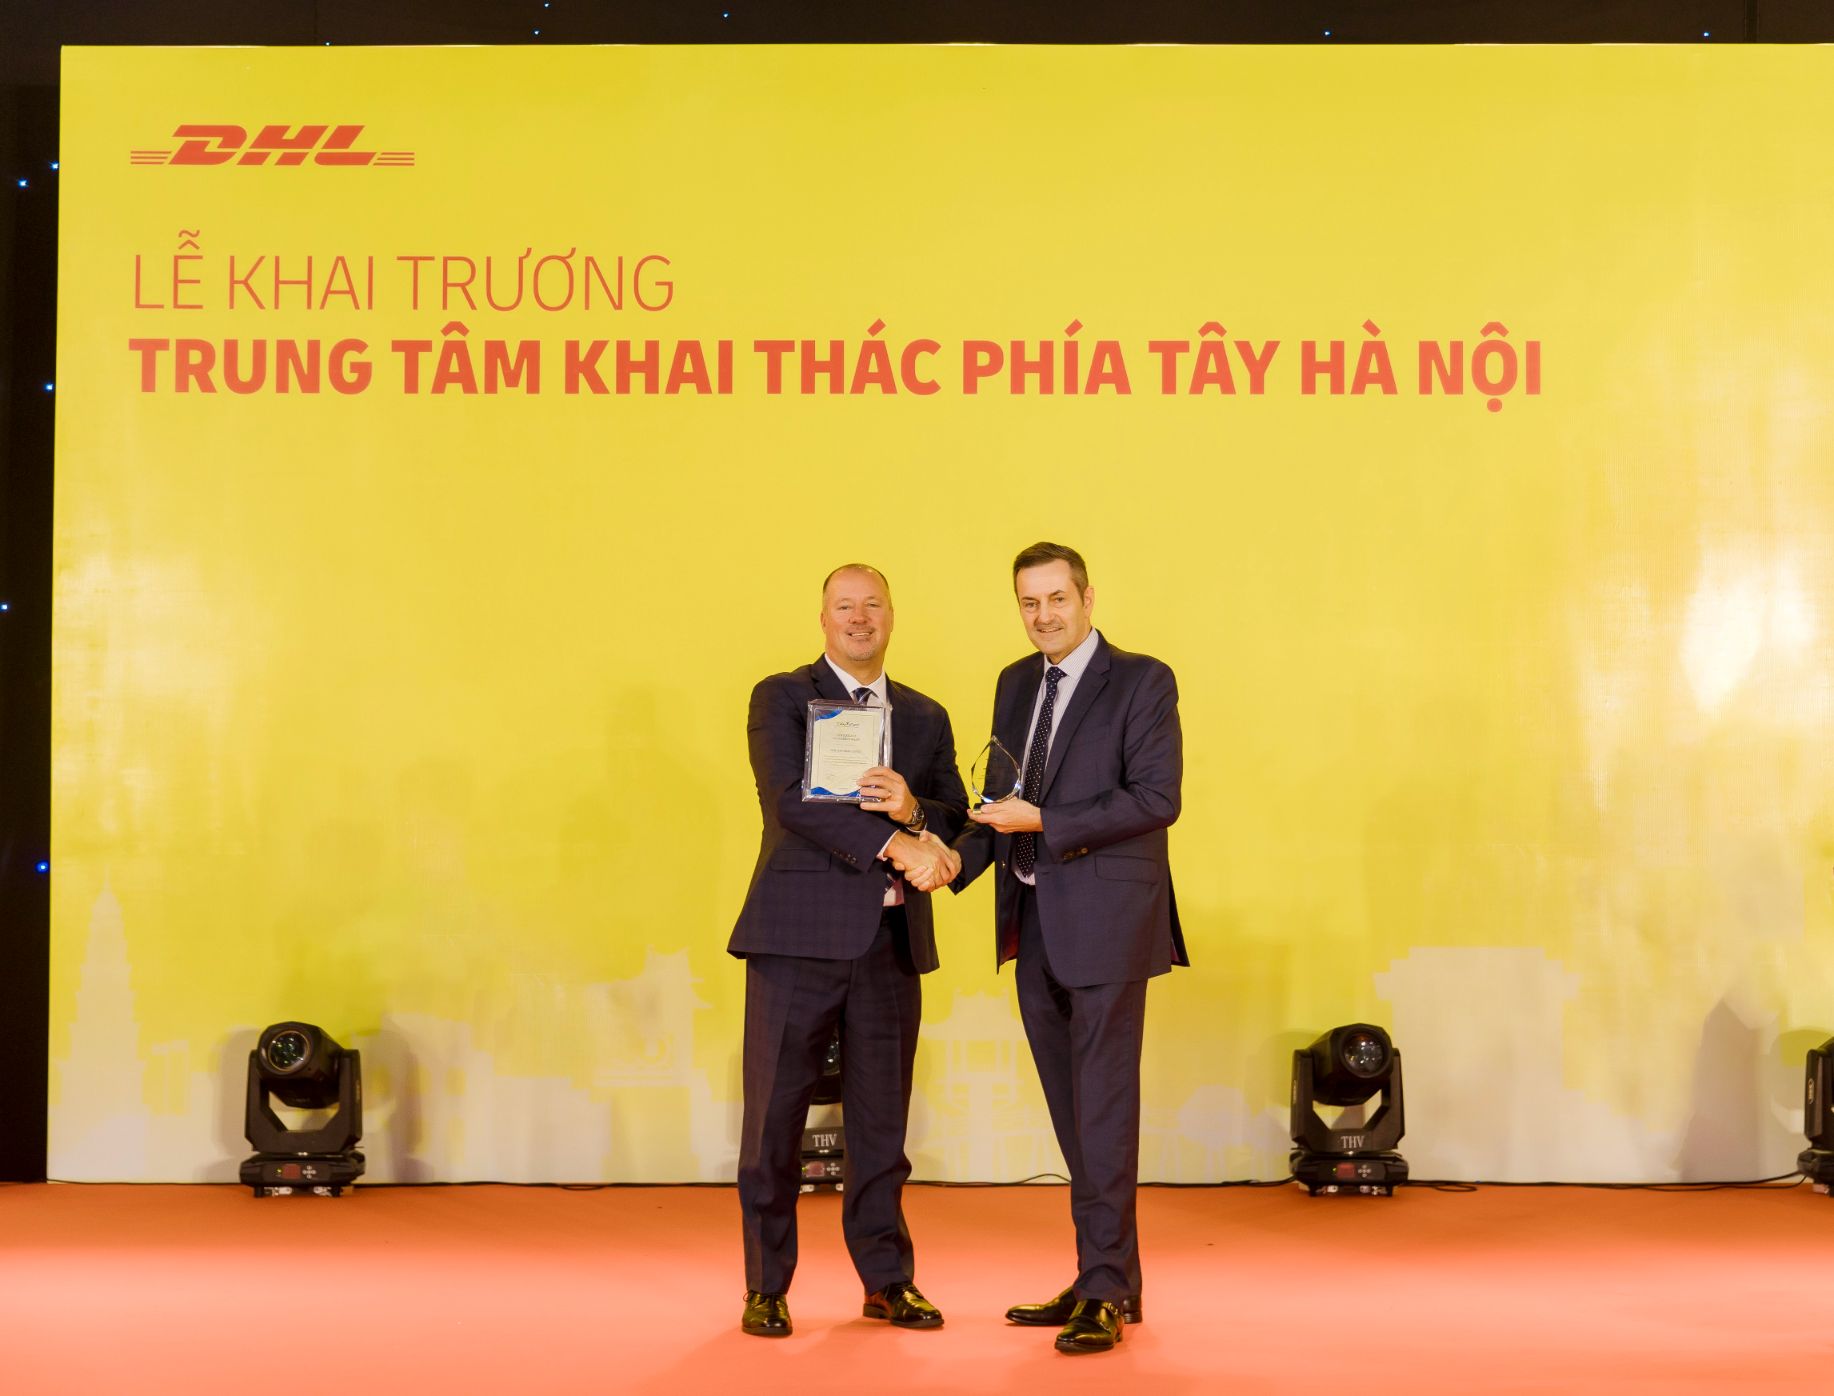 Travis Cobb Evp Global Network Operations Aviation Dhl Express On The Left Received 100th Tapa A Certificate In Apec From Tapa Apac Chairman 2